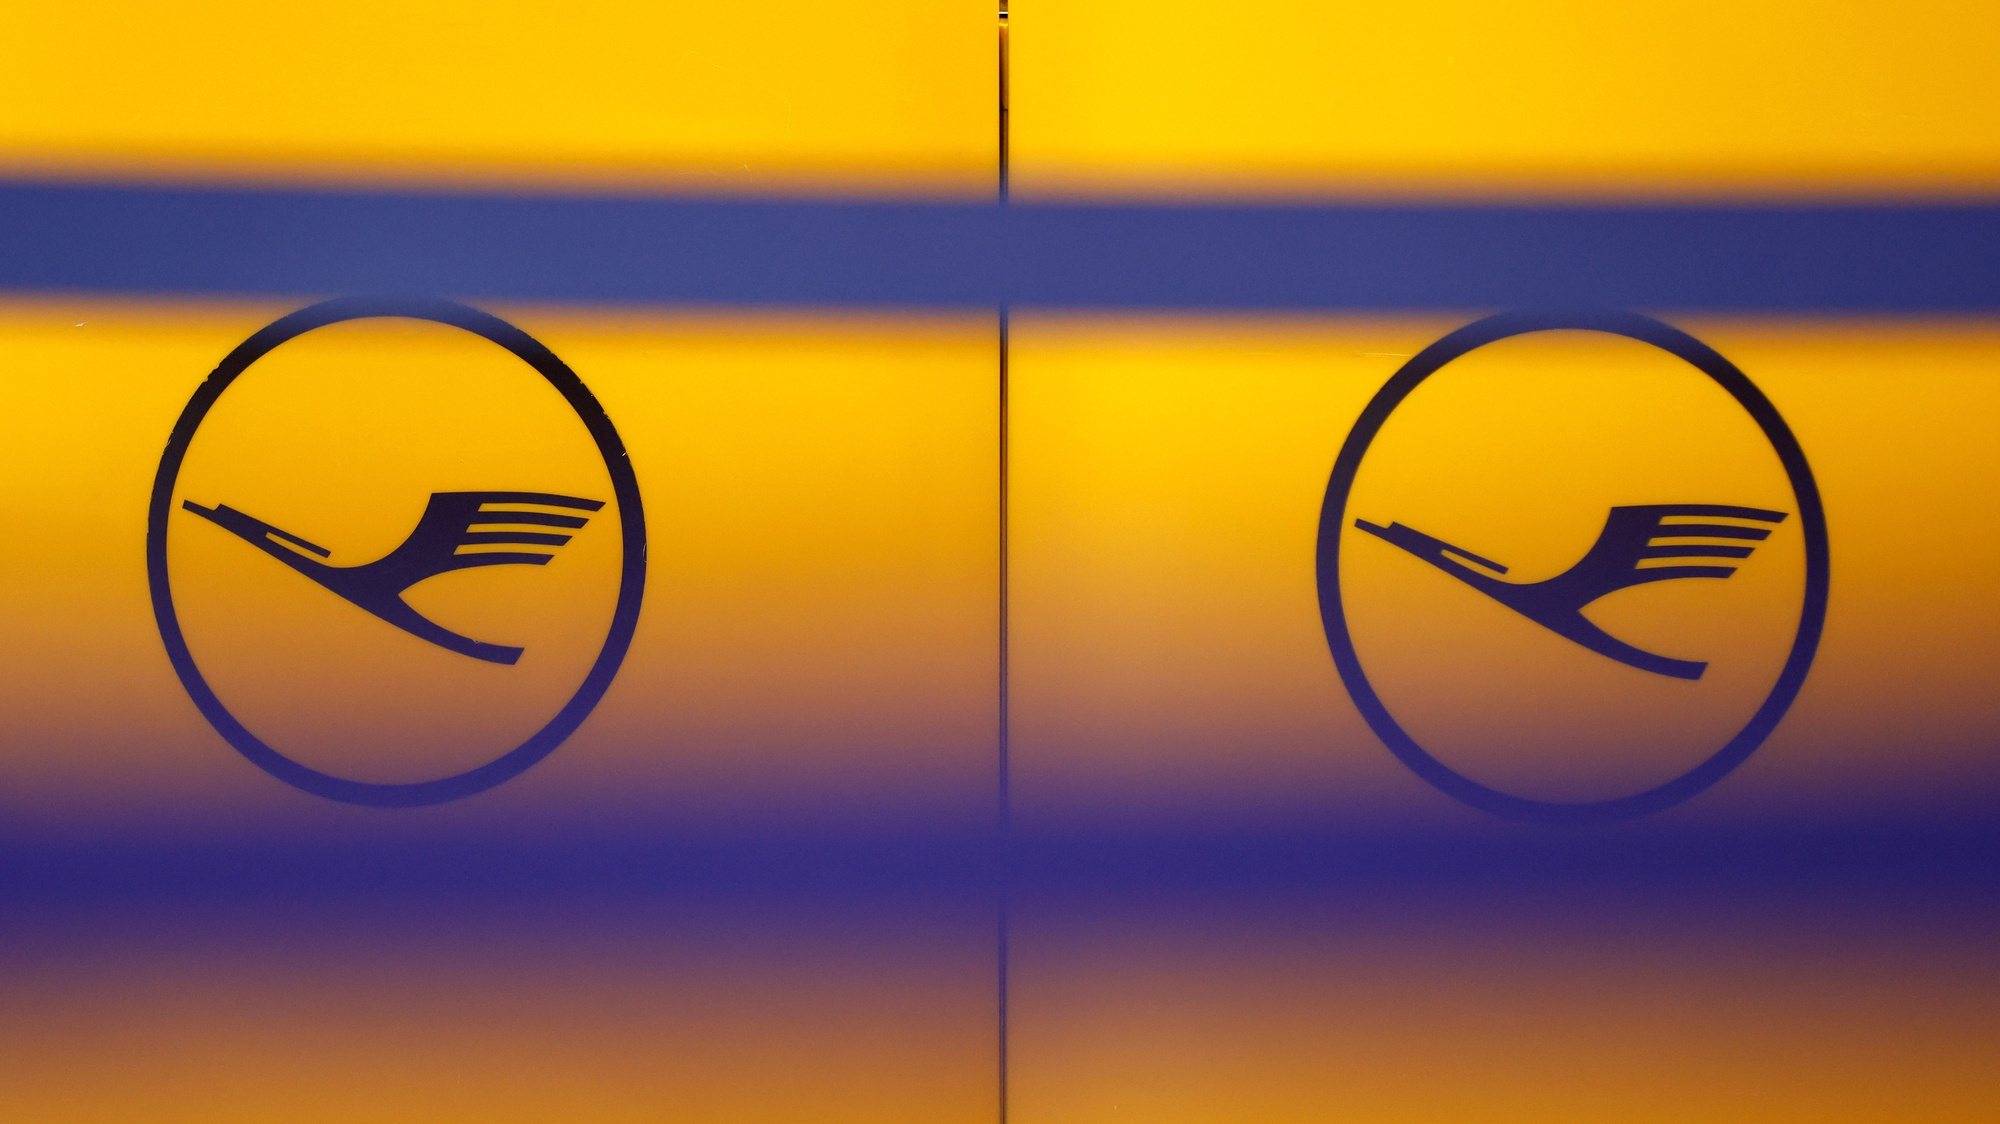 epa10498475 The logo of German airline Lufthansa at the international airport in Frankfurt am Main, Germany, 02 March 2023. According to a press release by Lufthansa, the group continues to see strong demand for air travel and expects to be able to generate Adjusted EBIT1 of around 1.5 billion euros in the 2022 financial year. Lufthansa Group will release their preliminary business figures for the full-year 2022 on 03 March 2023.  EPA/RONALD WITTEK